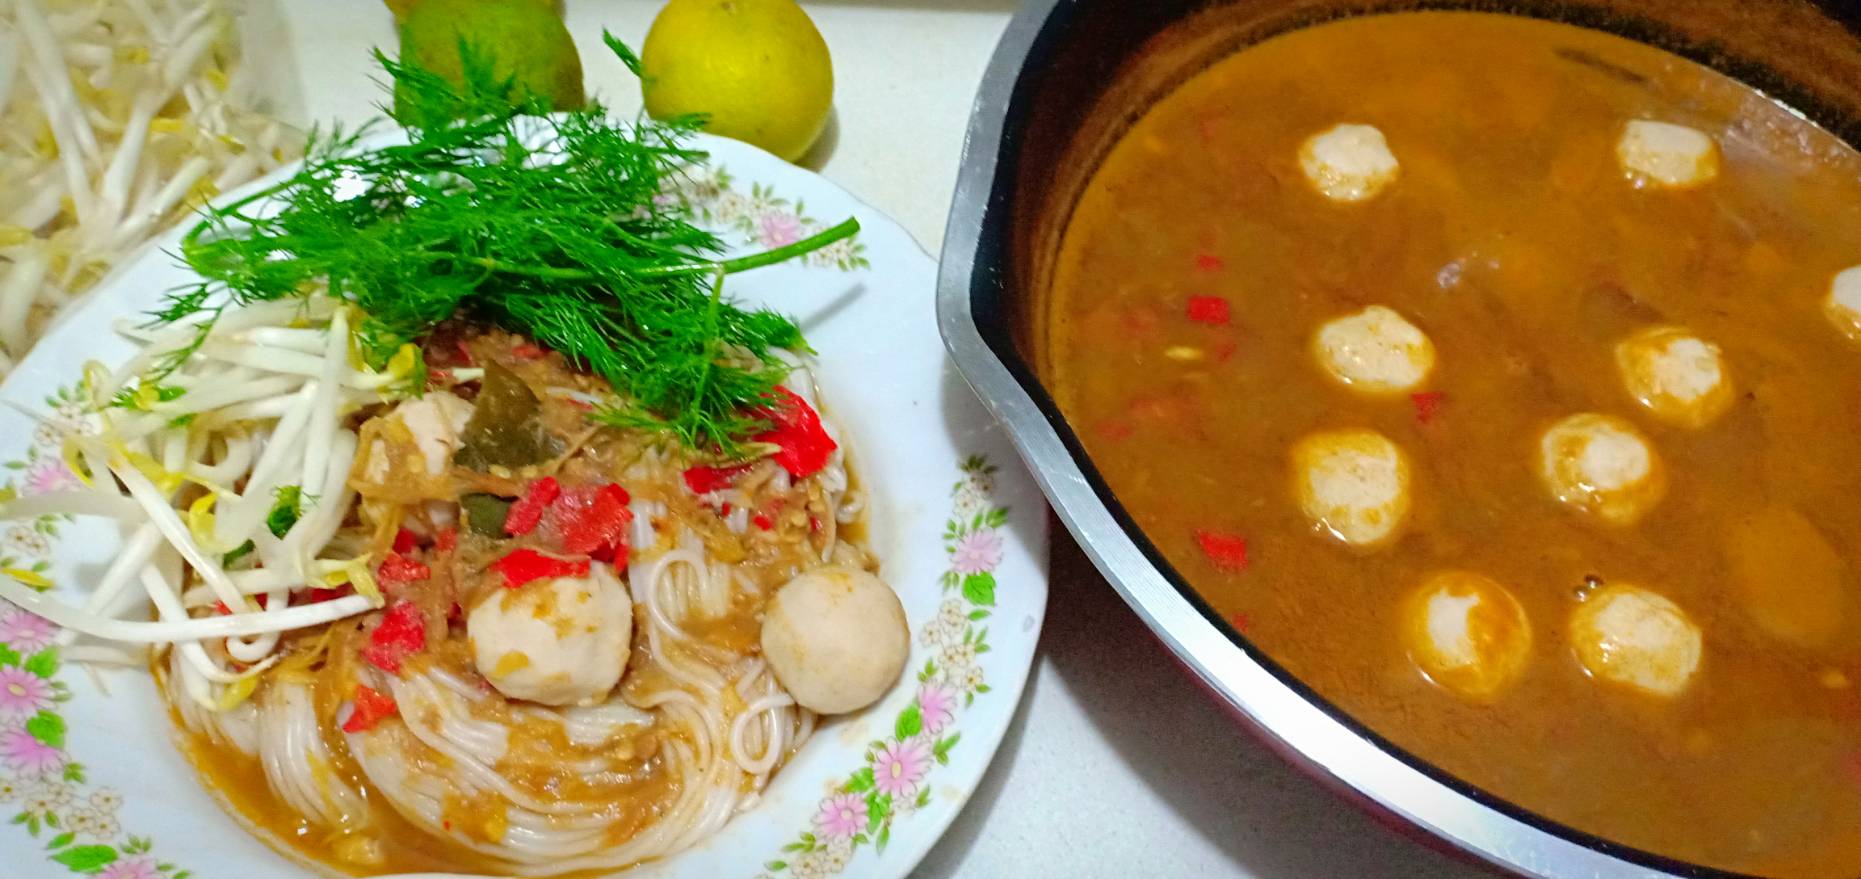 Round rice noodles with fish curry (without coconut milk)